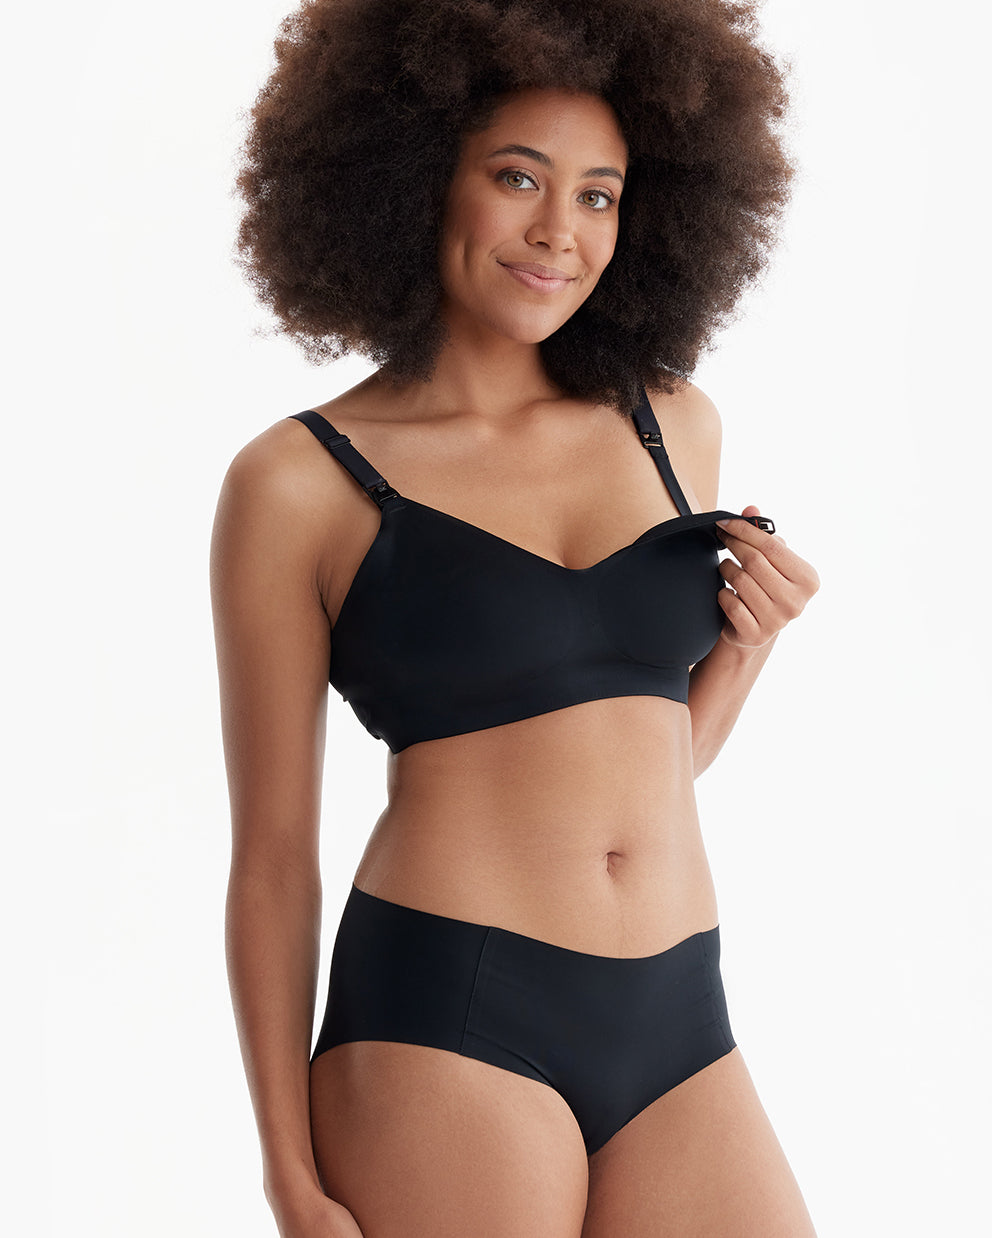 The Essentials: Our Jelly Strip + SMOOTH + DEX - 4-in-1 pumping Bra Bundle (3 Pack)